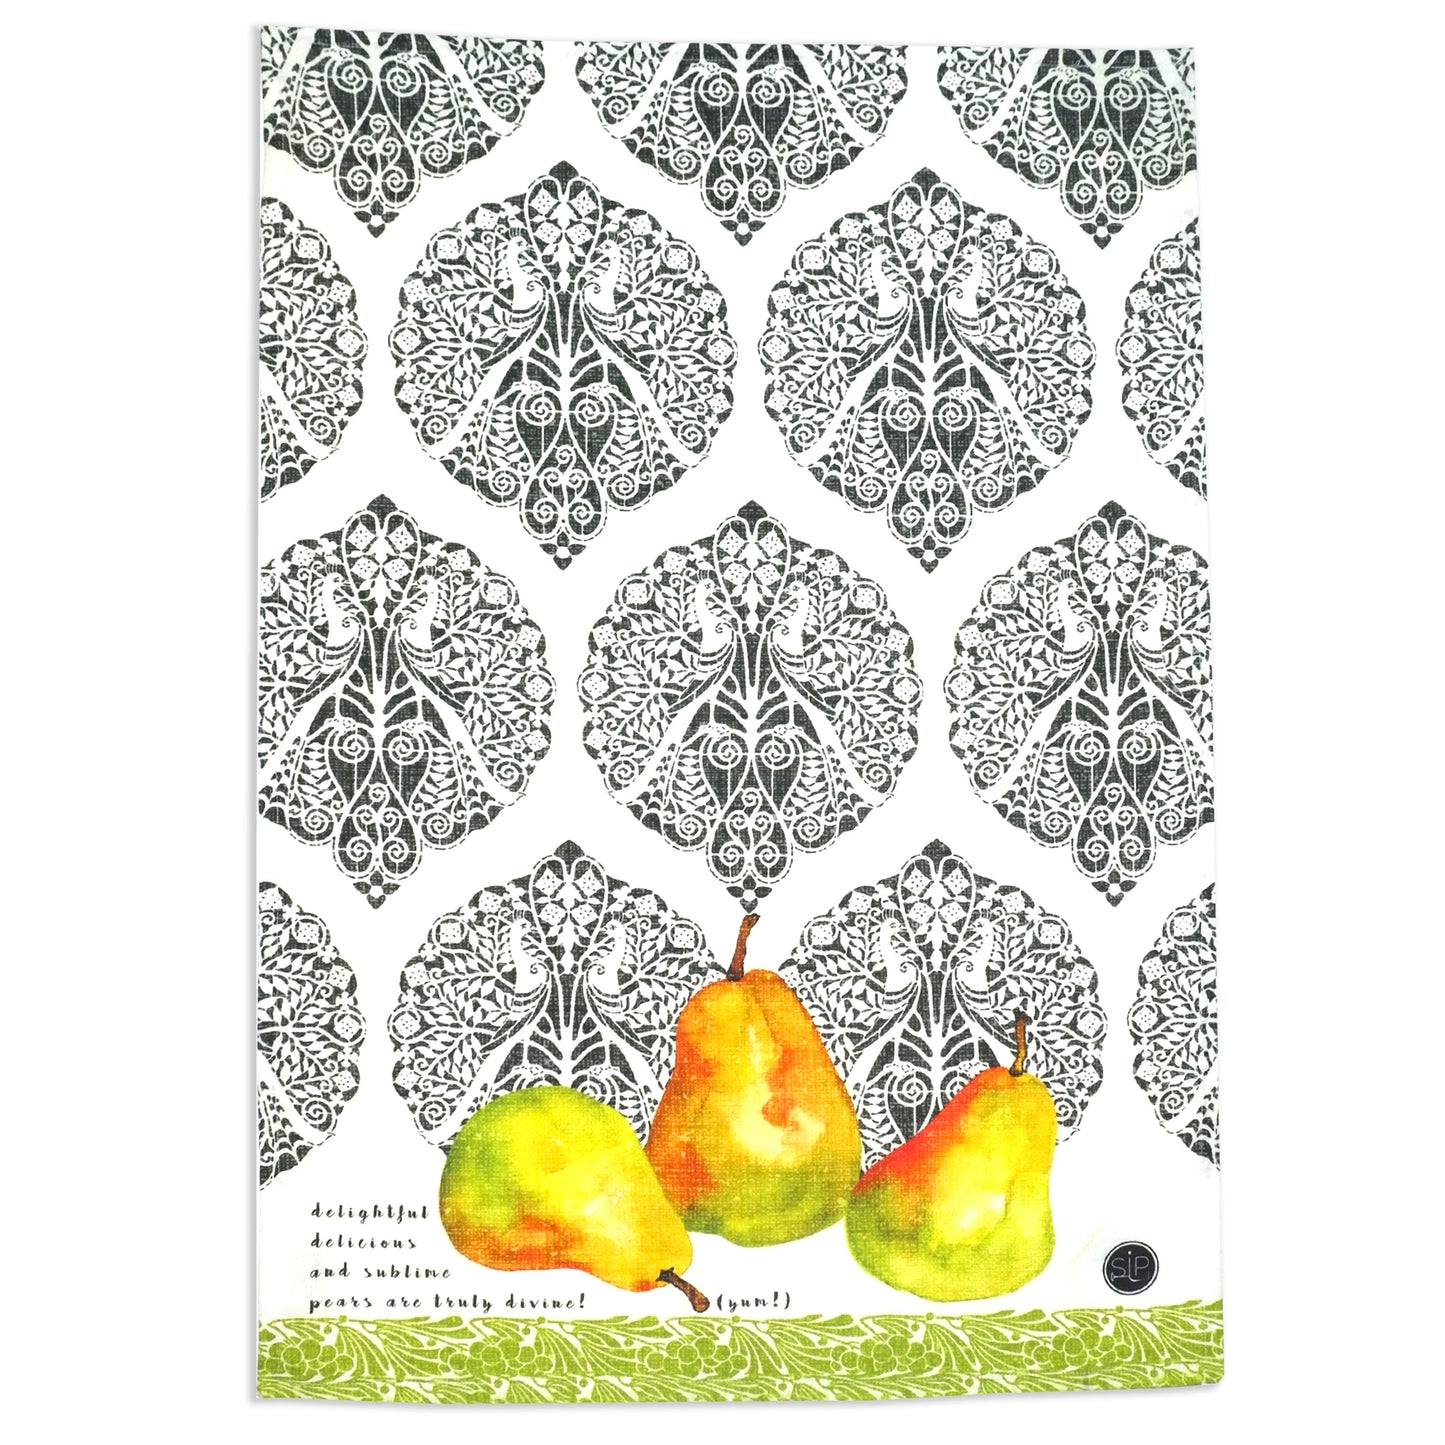 "Ode to Pears" Kitchen Towel